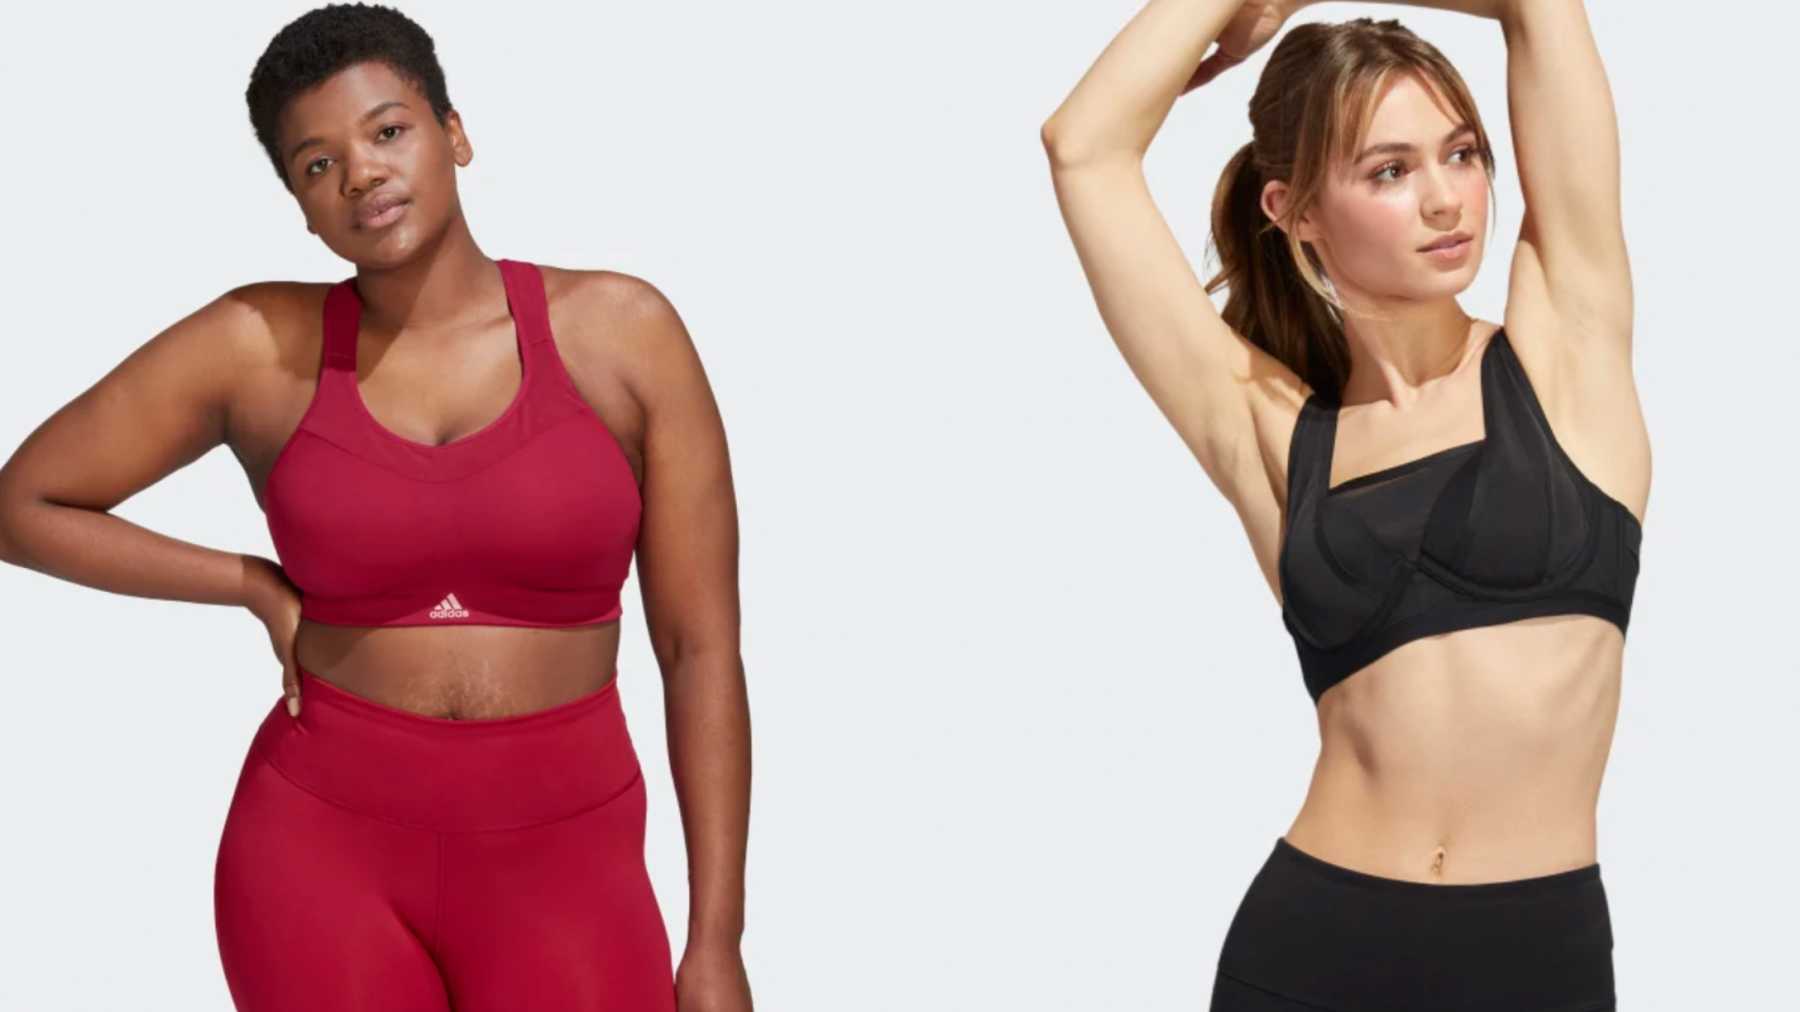 ADIDAS SPORTS BRA AD SHOWS 25 PEOPLE'S BARE BREASTS SO 'EVERYONE CAN FIND  THE RIGHT 